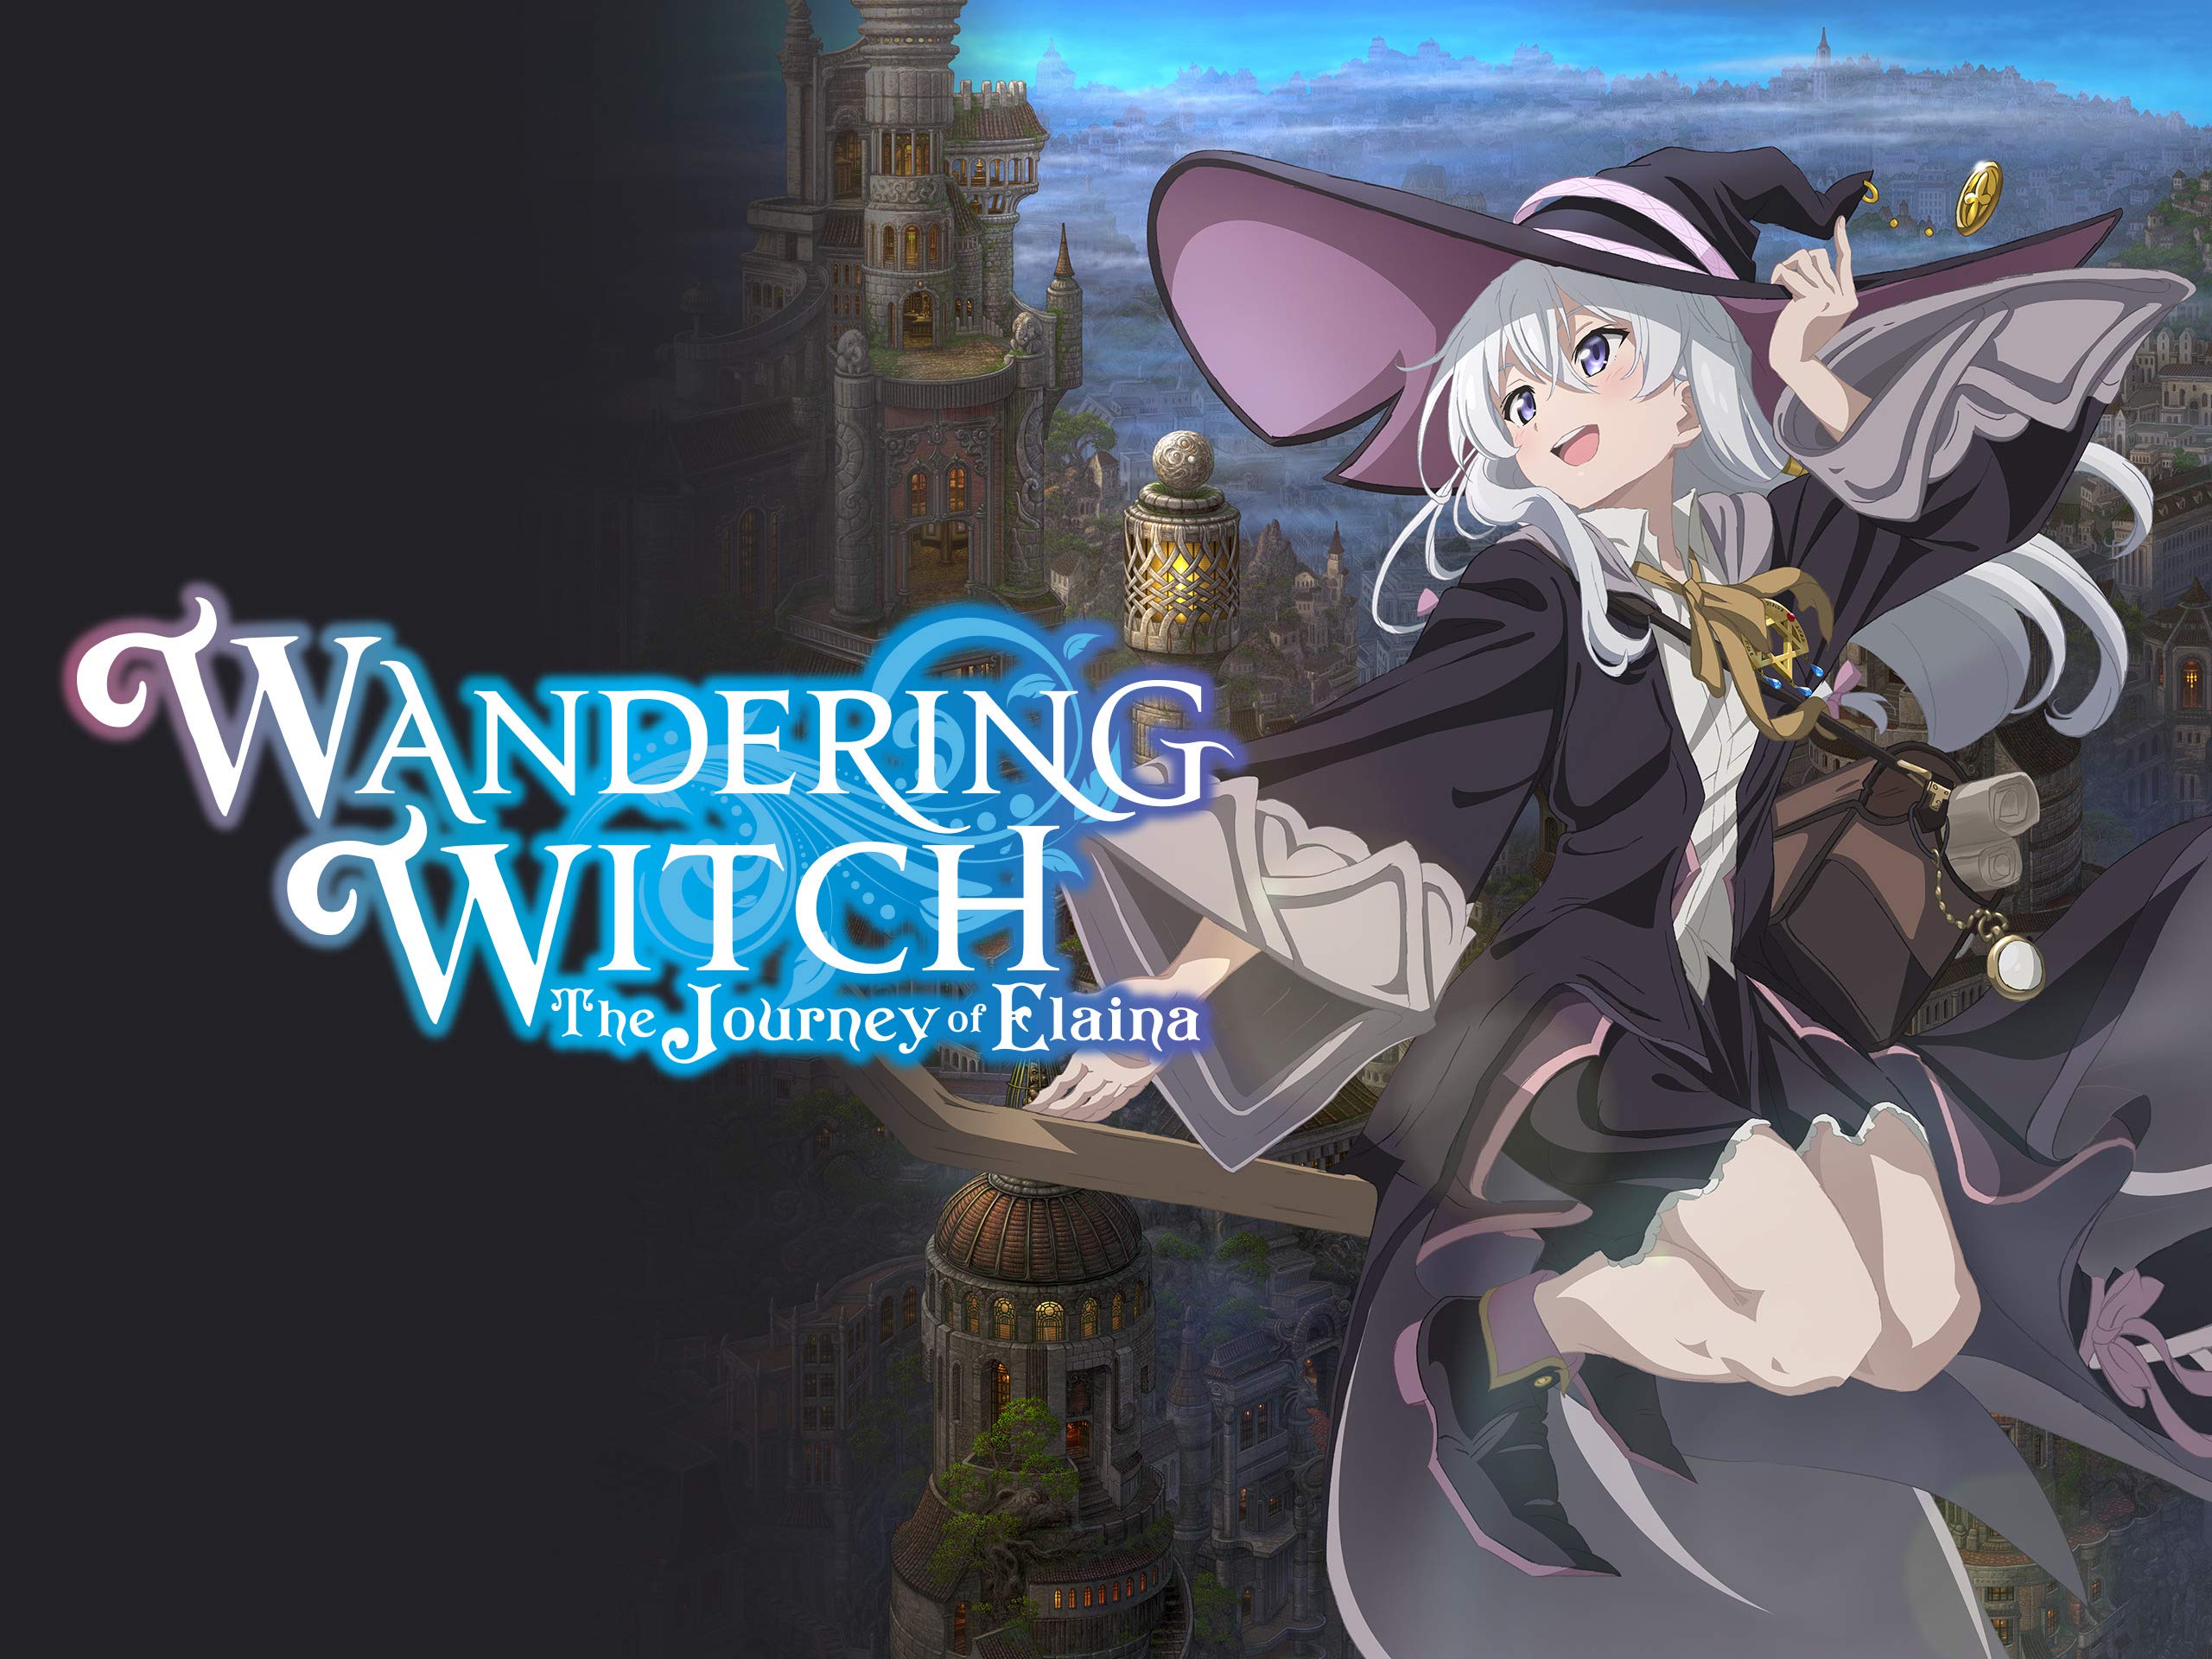 Watch Wandering Witch: The Journey of Elaina (Original Japanese Version)